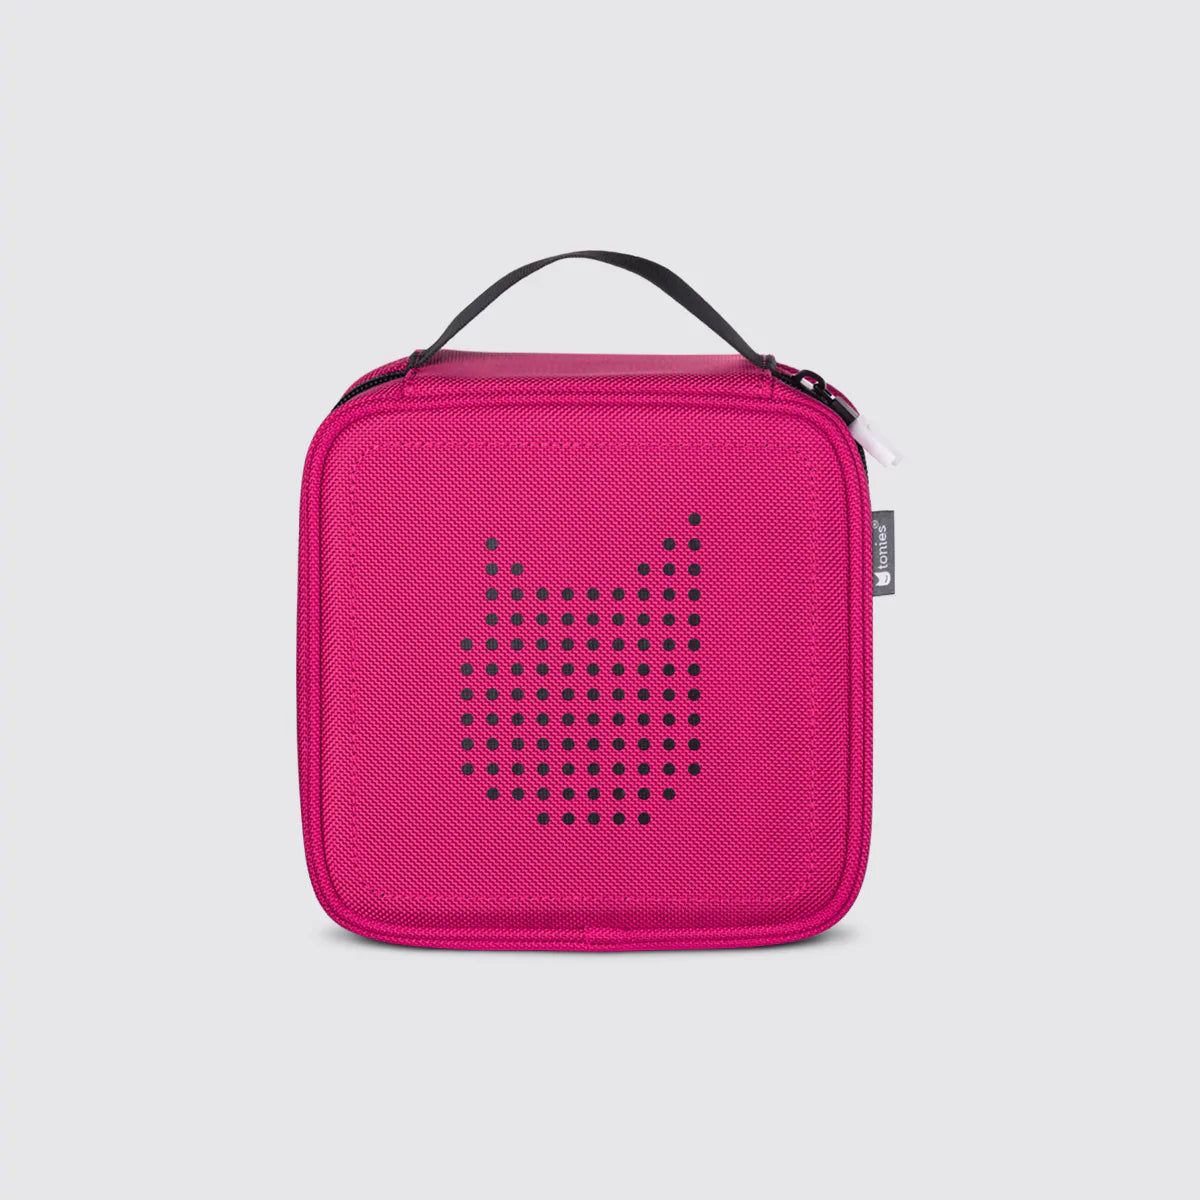 Tonies Carrying Case - Secure Protection for Up To 10 Tonies Pink